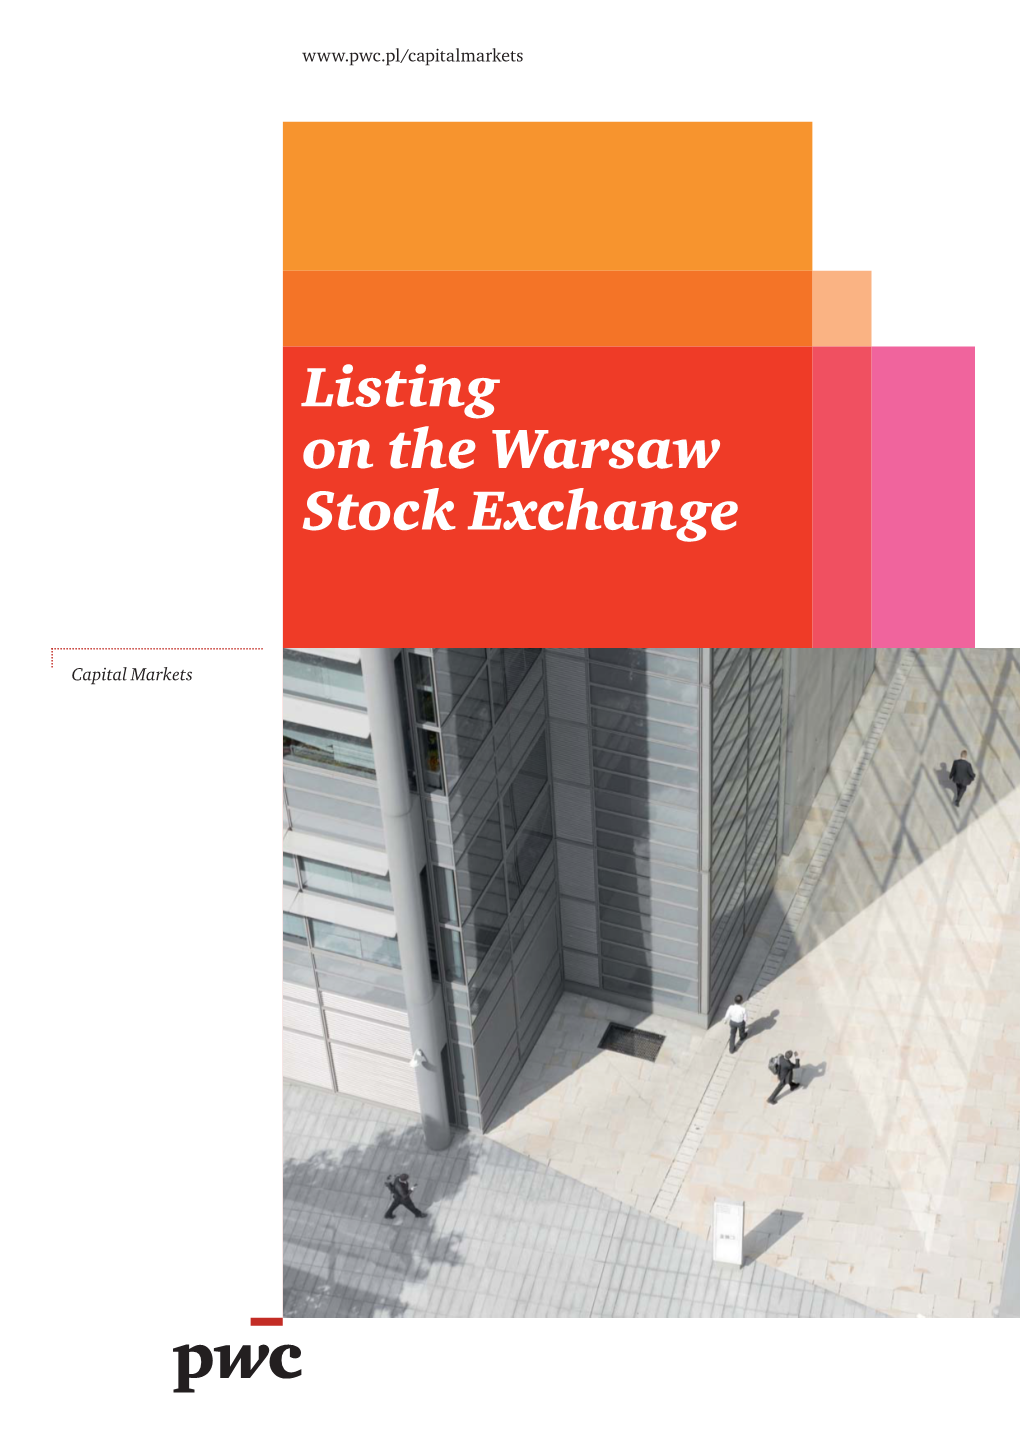 Listing on the Warsaw Stock Exchange